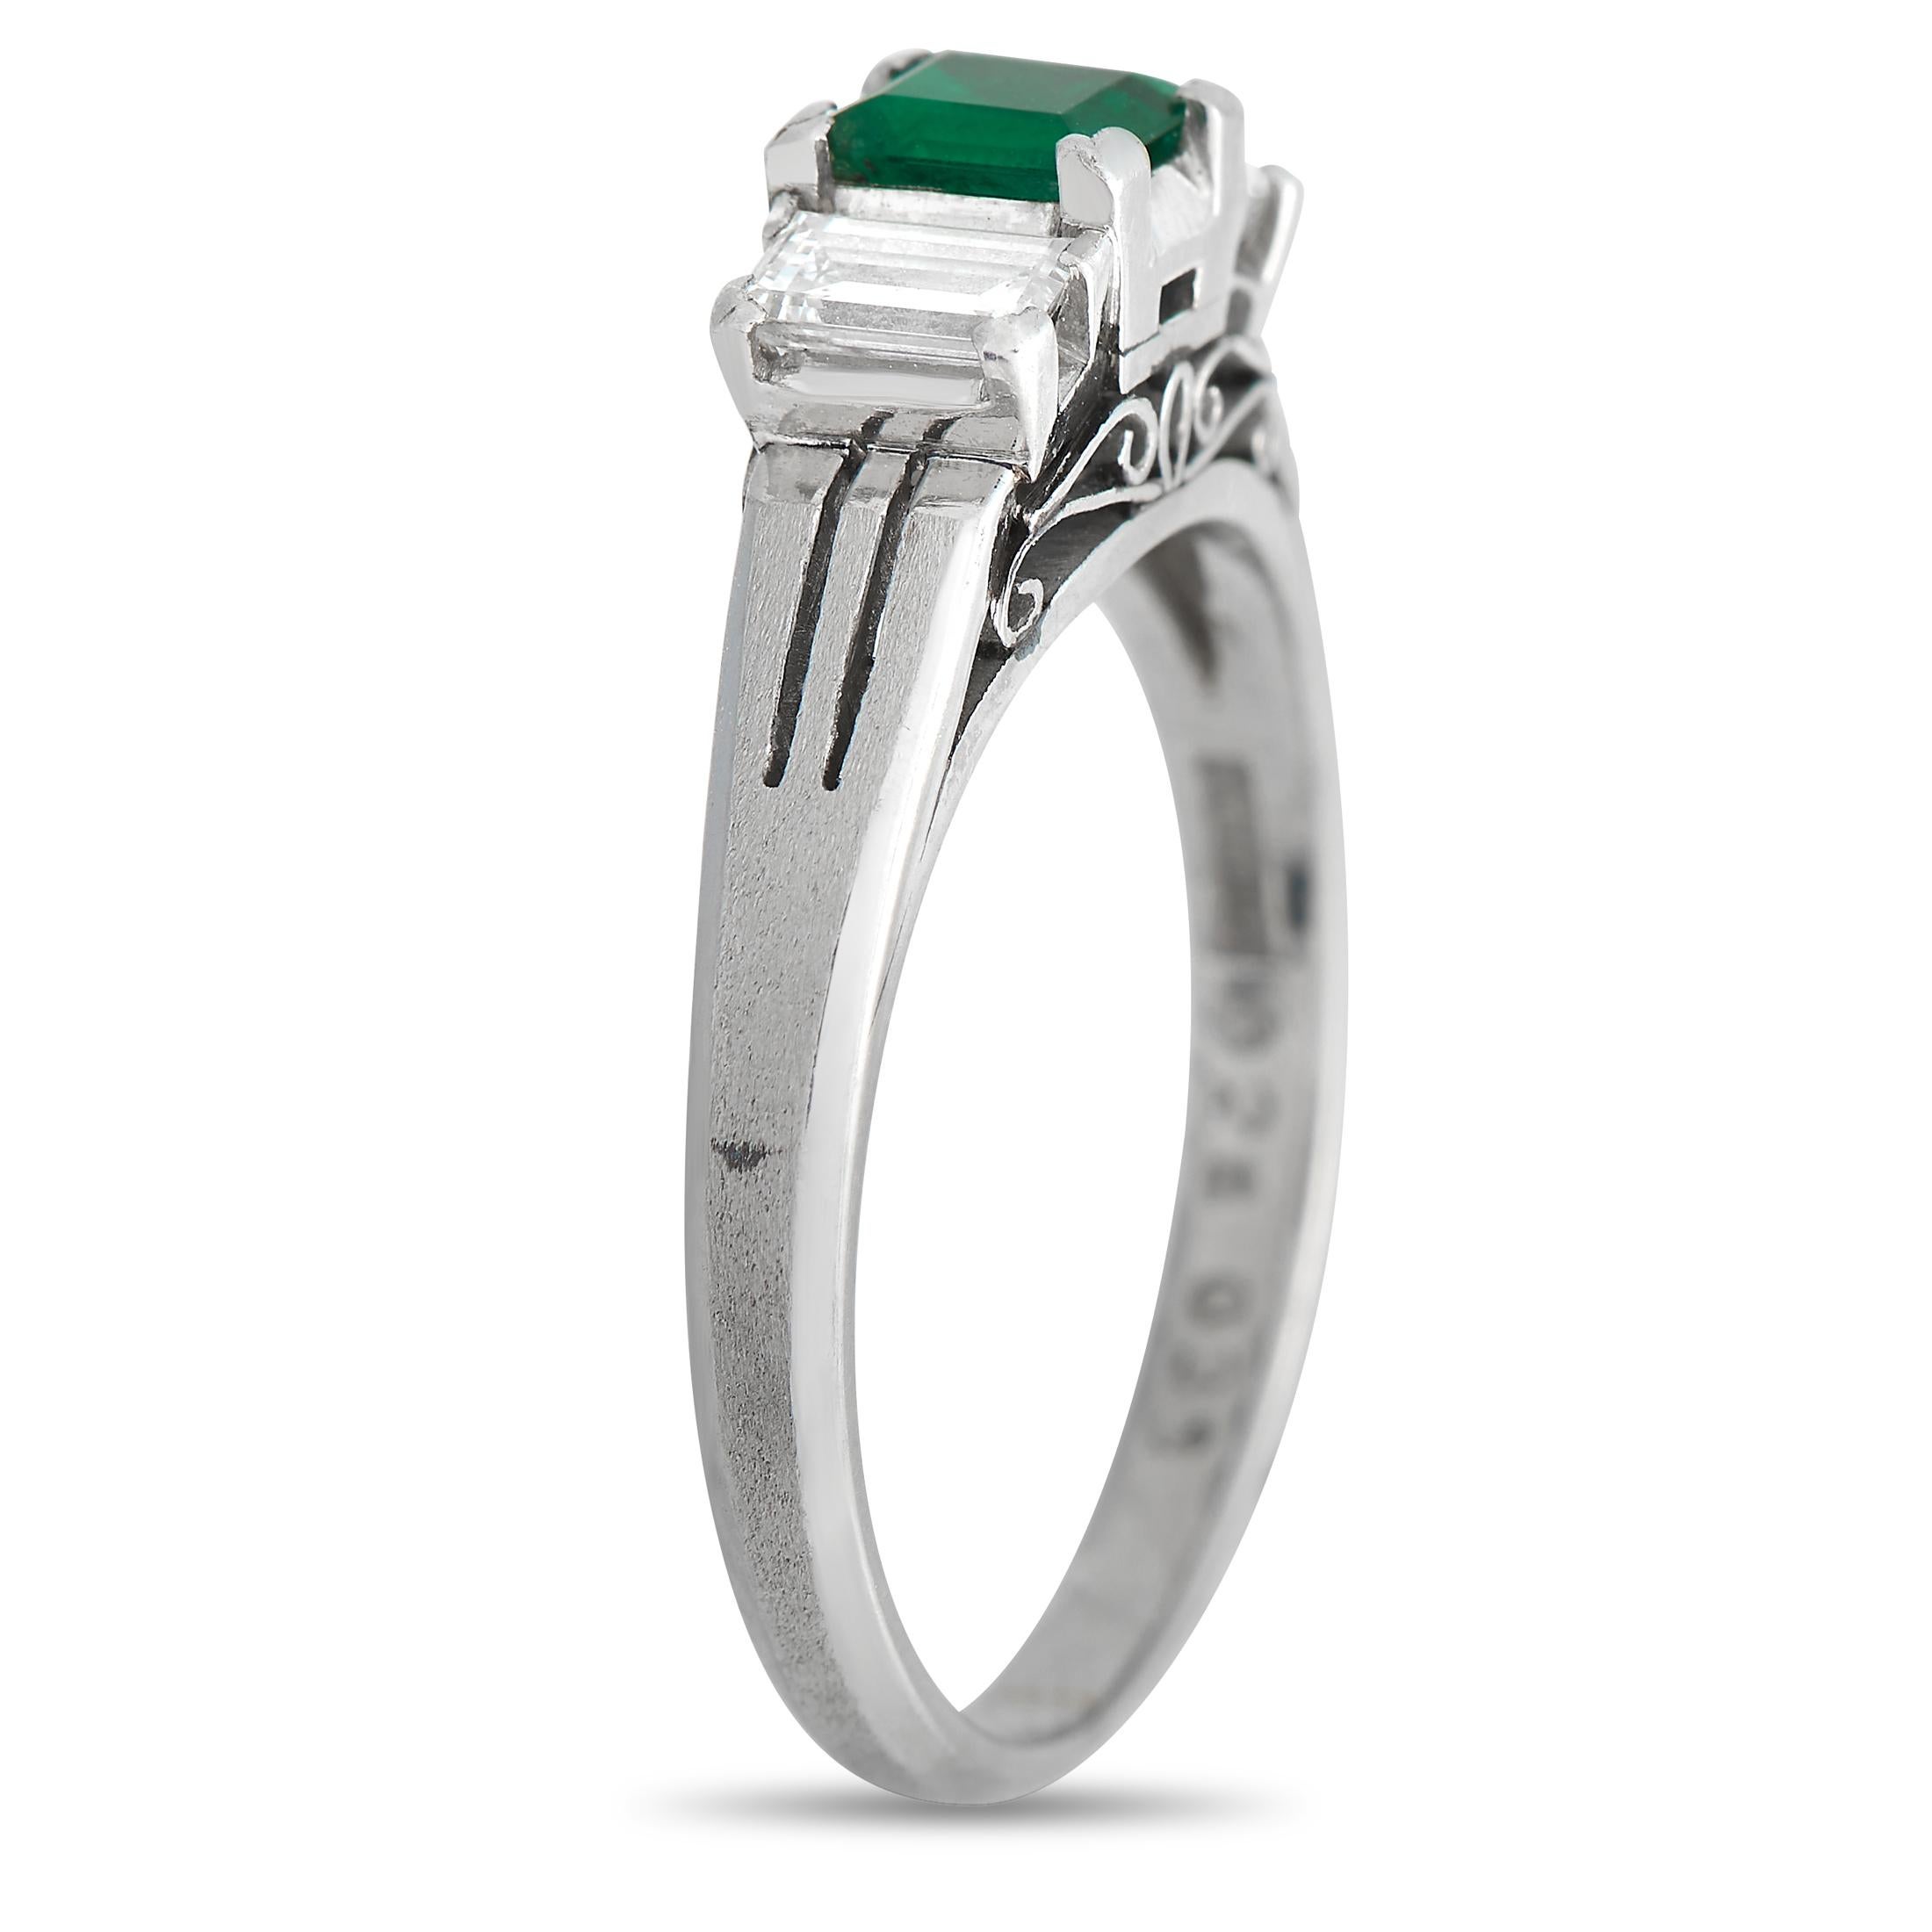 A breathtaking 0.28 carat Emerald center stone makes a statement at the center of this exquisite ring. Surrounded by two baguette-cut diamonds with a total weight of 0.39 carats, this impressive accessory is impossible to ignore. Crafted from